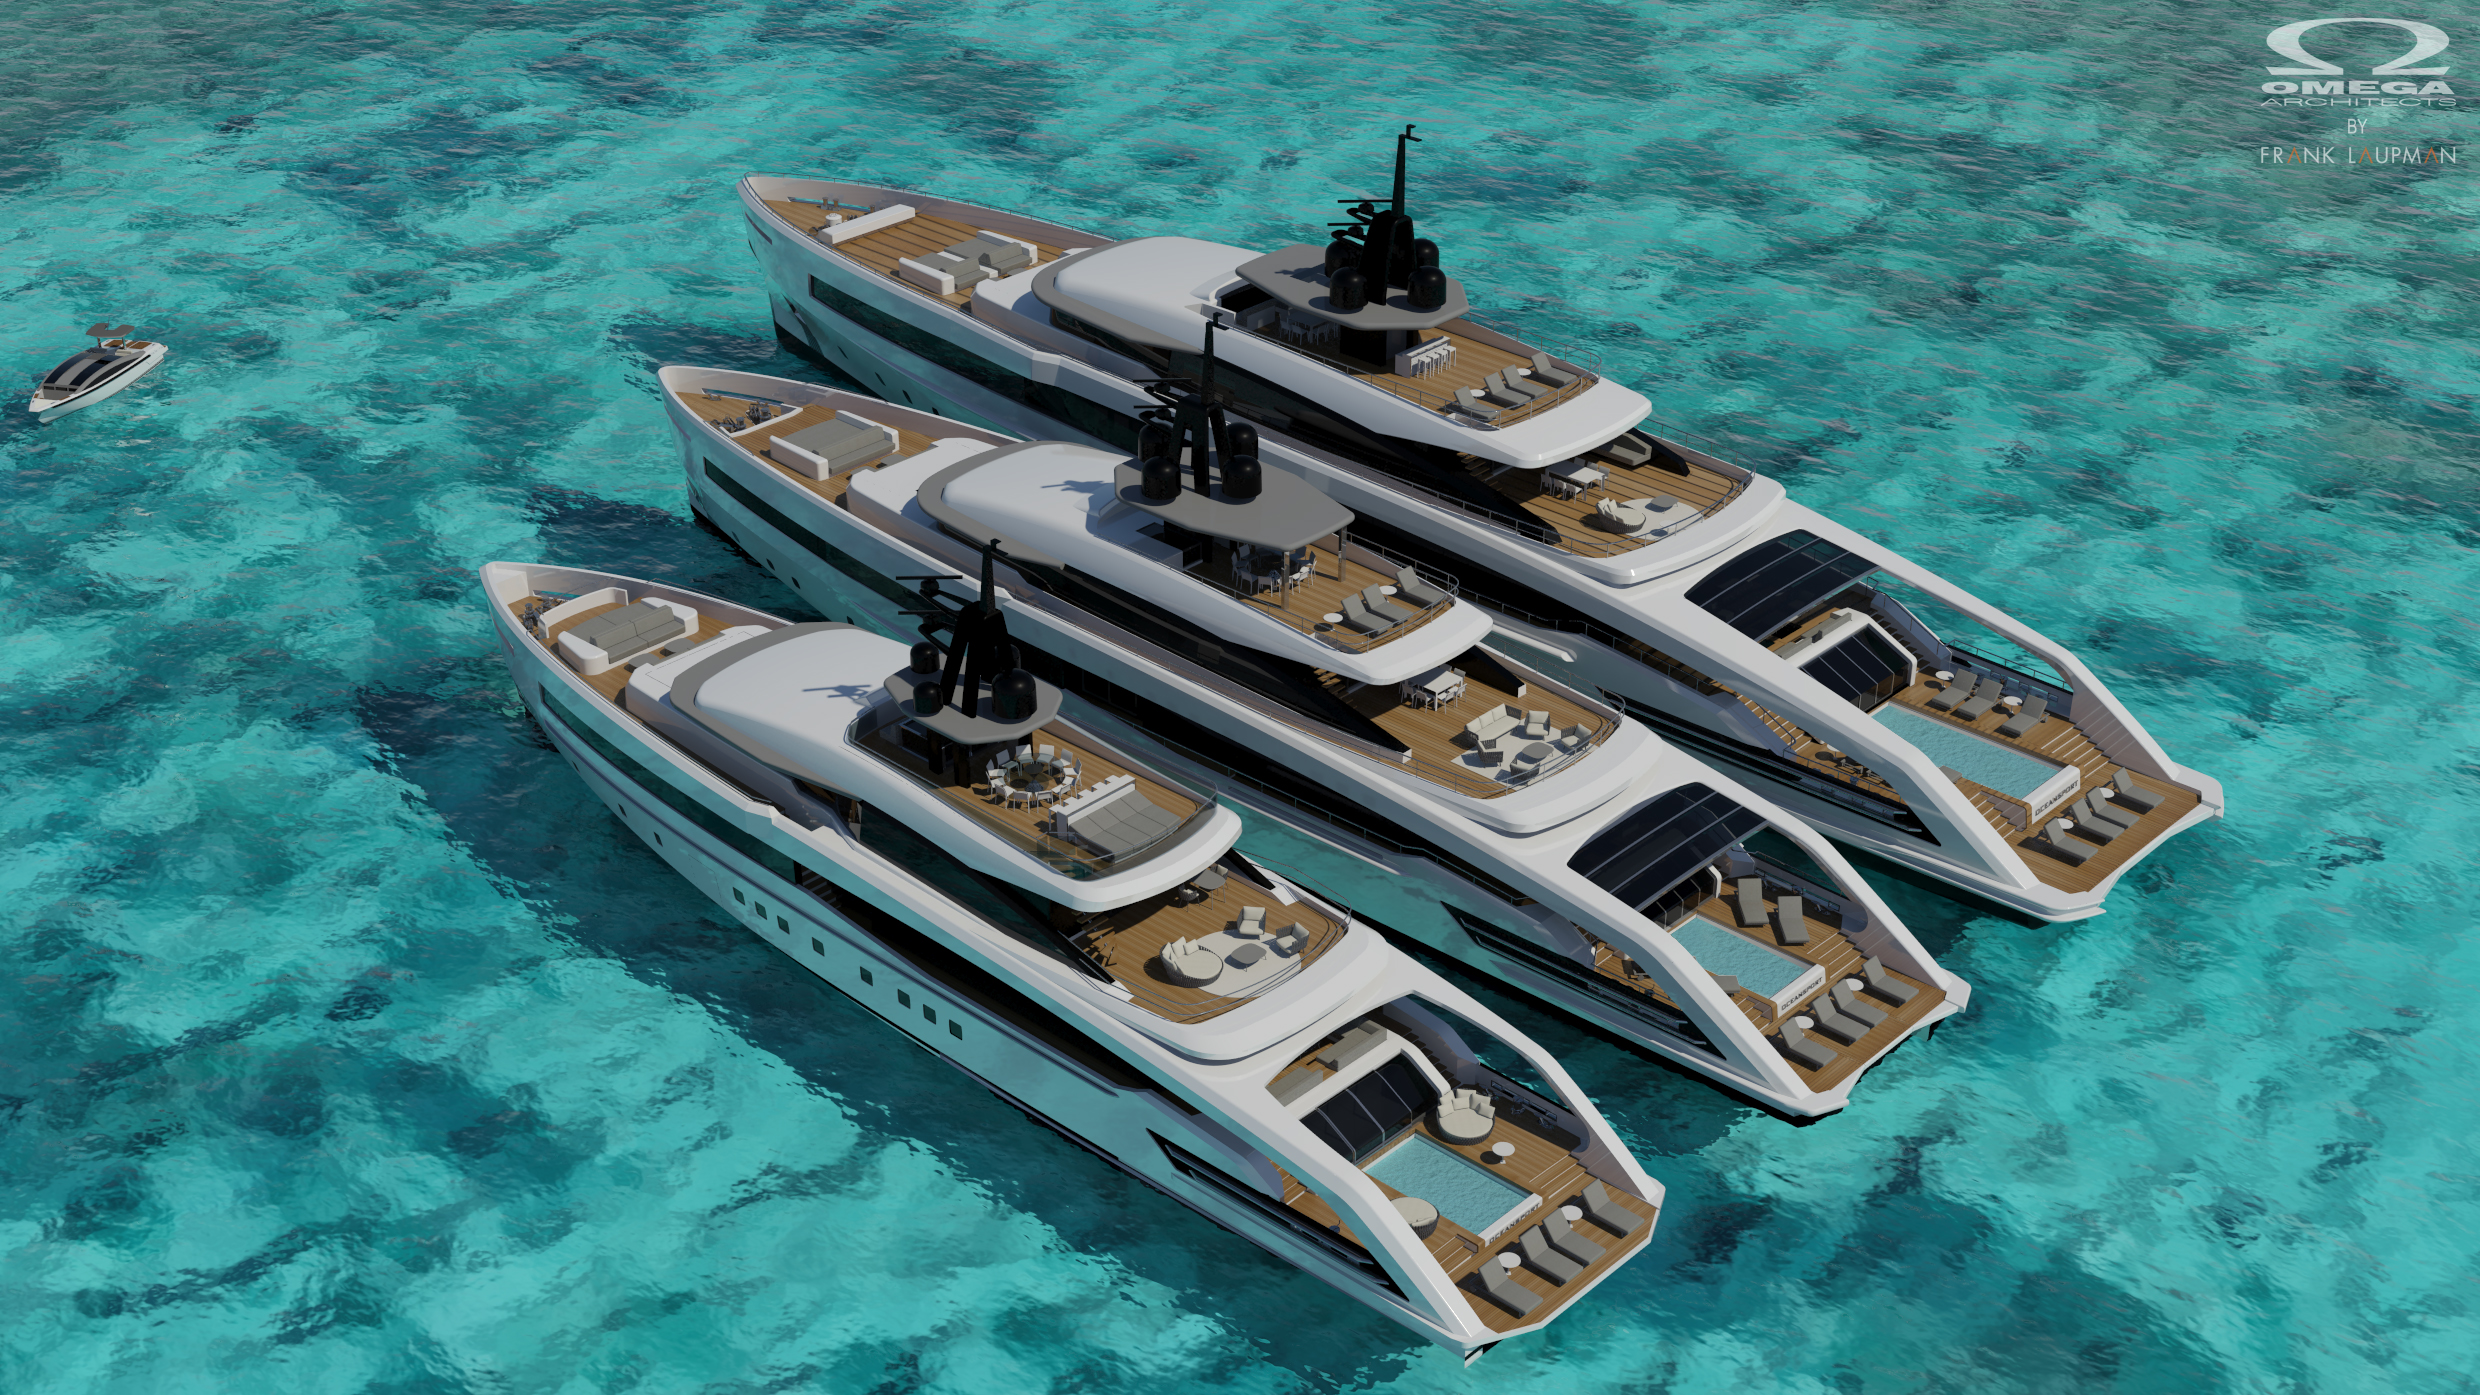 CRN presents the "OCEANSPORT" projects designed by Omega Architects